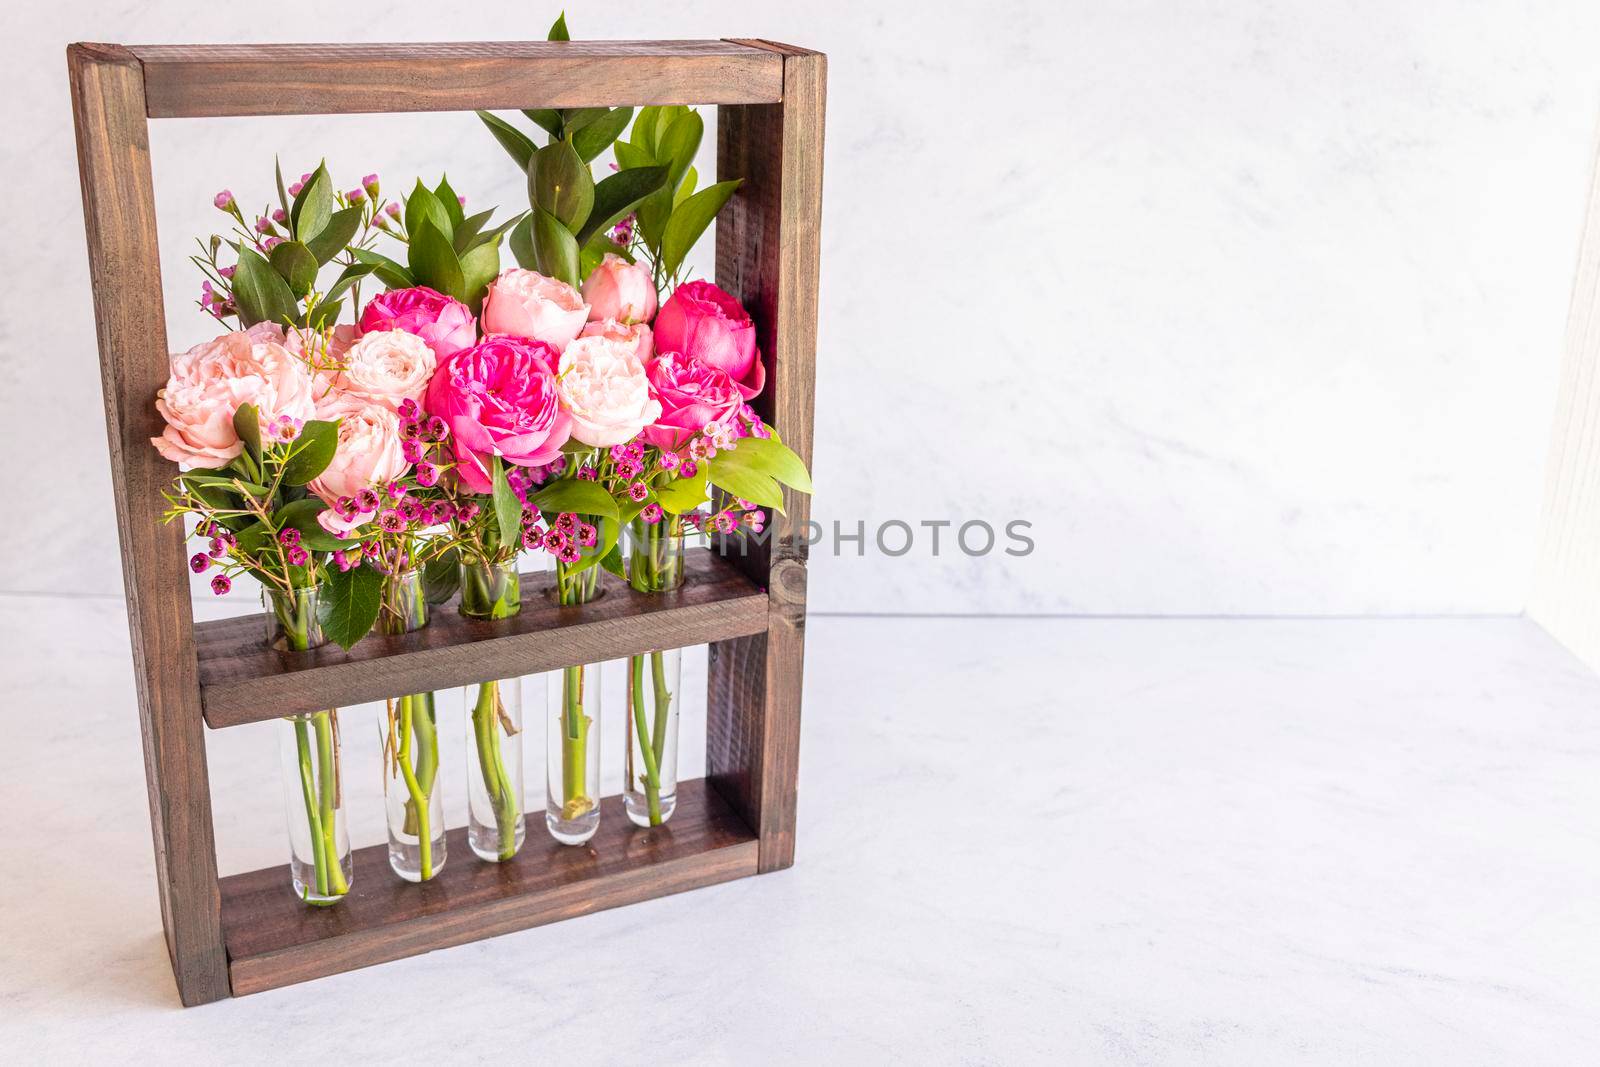 Floral arrangement in wooden box by eagg13